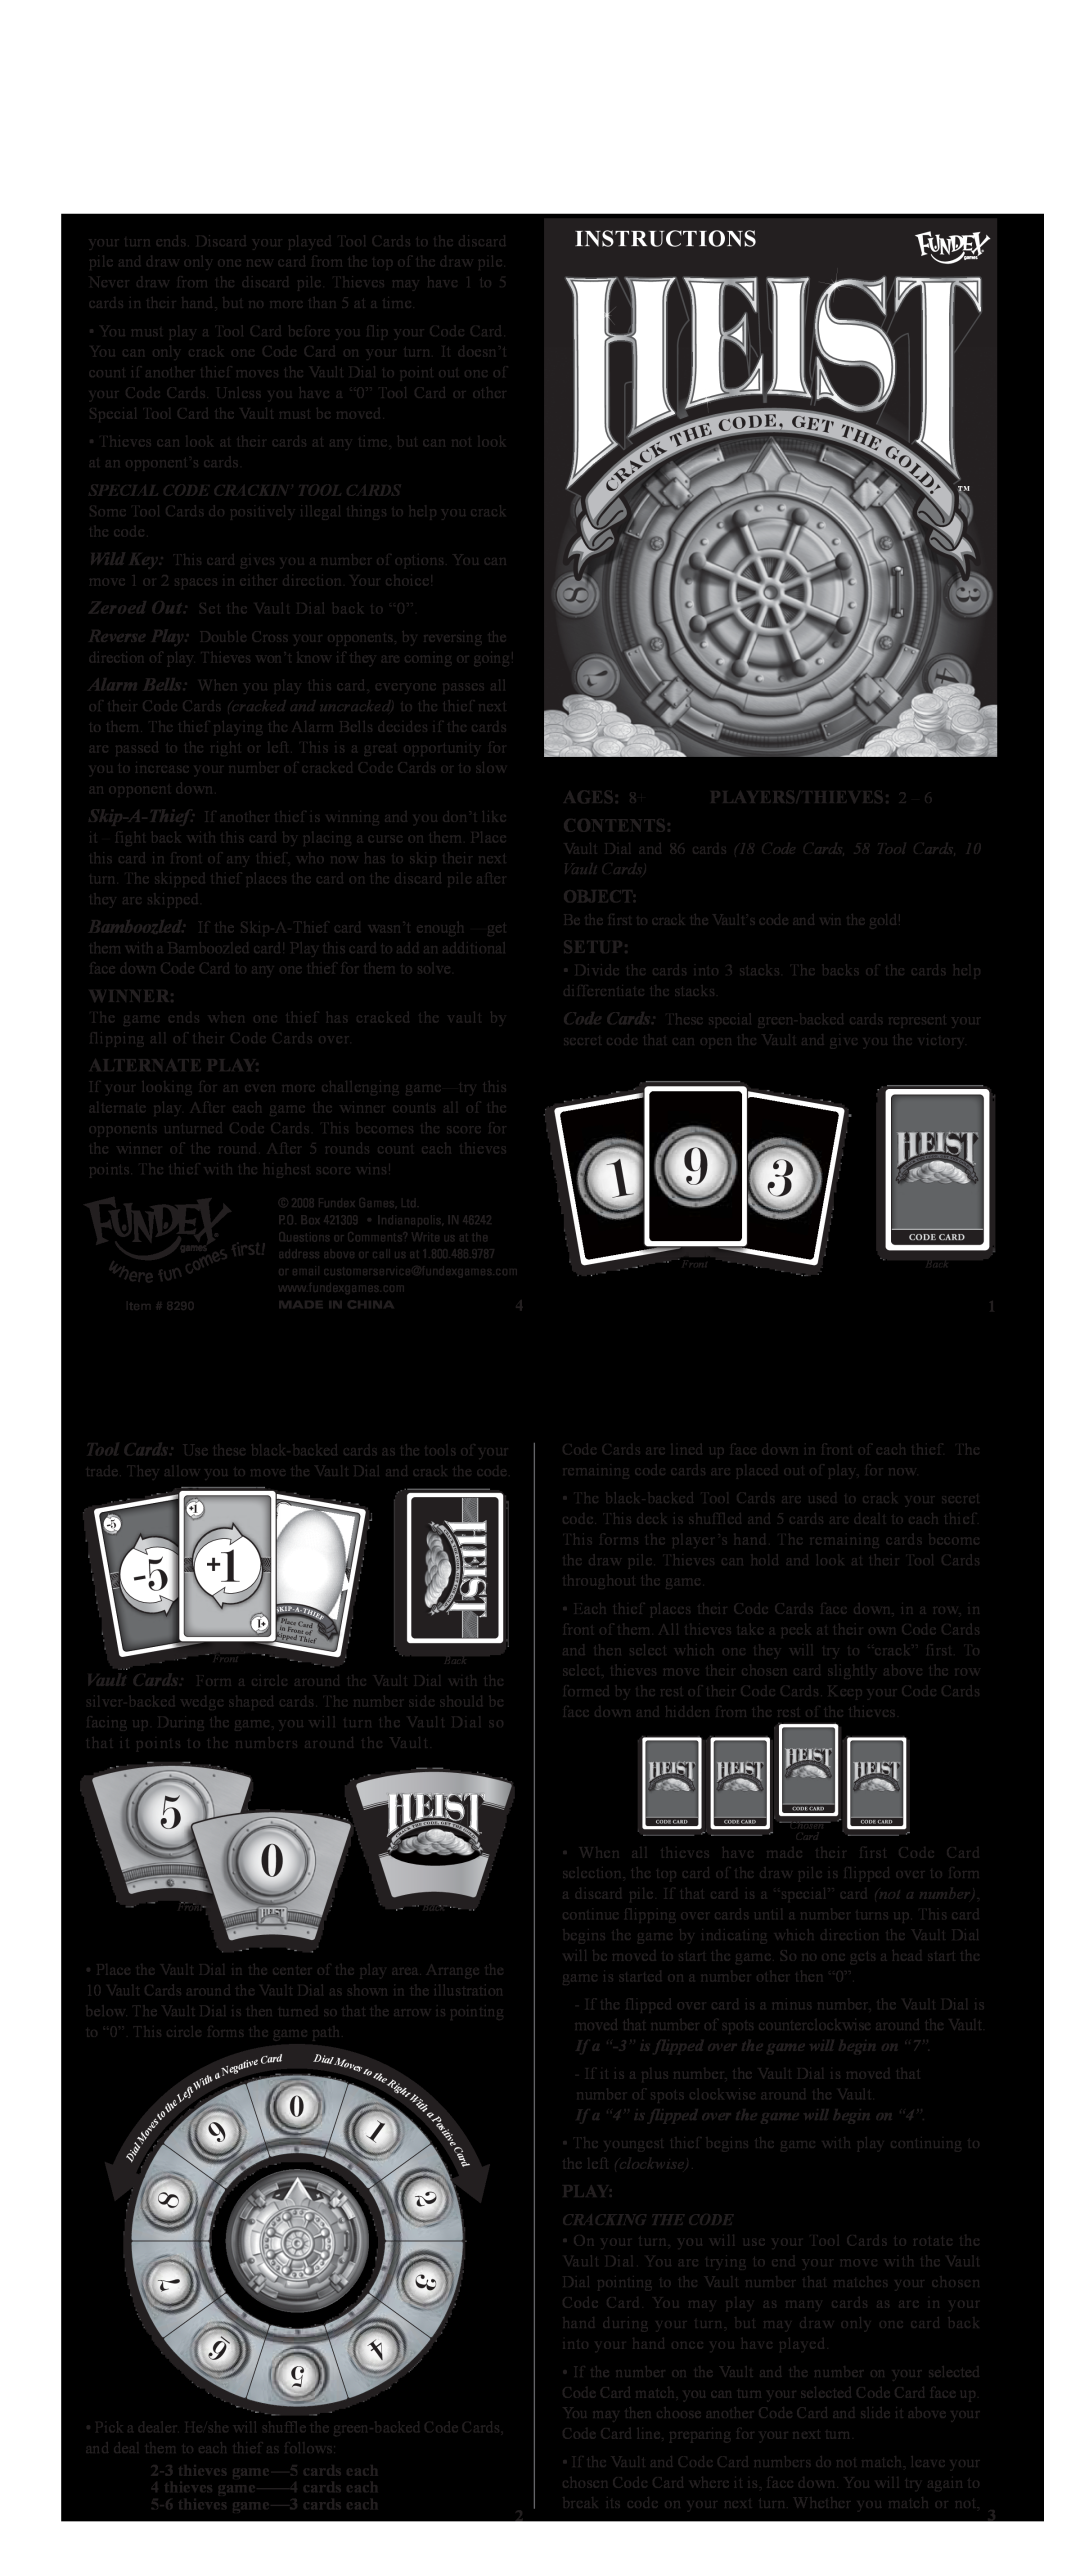 Fundex Games Heist manual Instructions, Winner, Alternate Play, AGES 8+ PLAYERS/THIEVES 2 CONTENTS, Object, Setup, De, G 